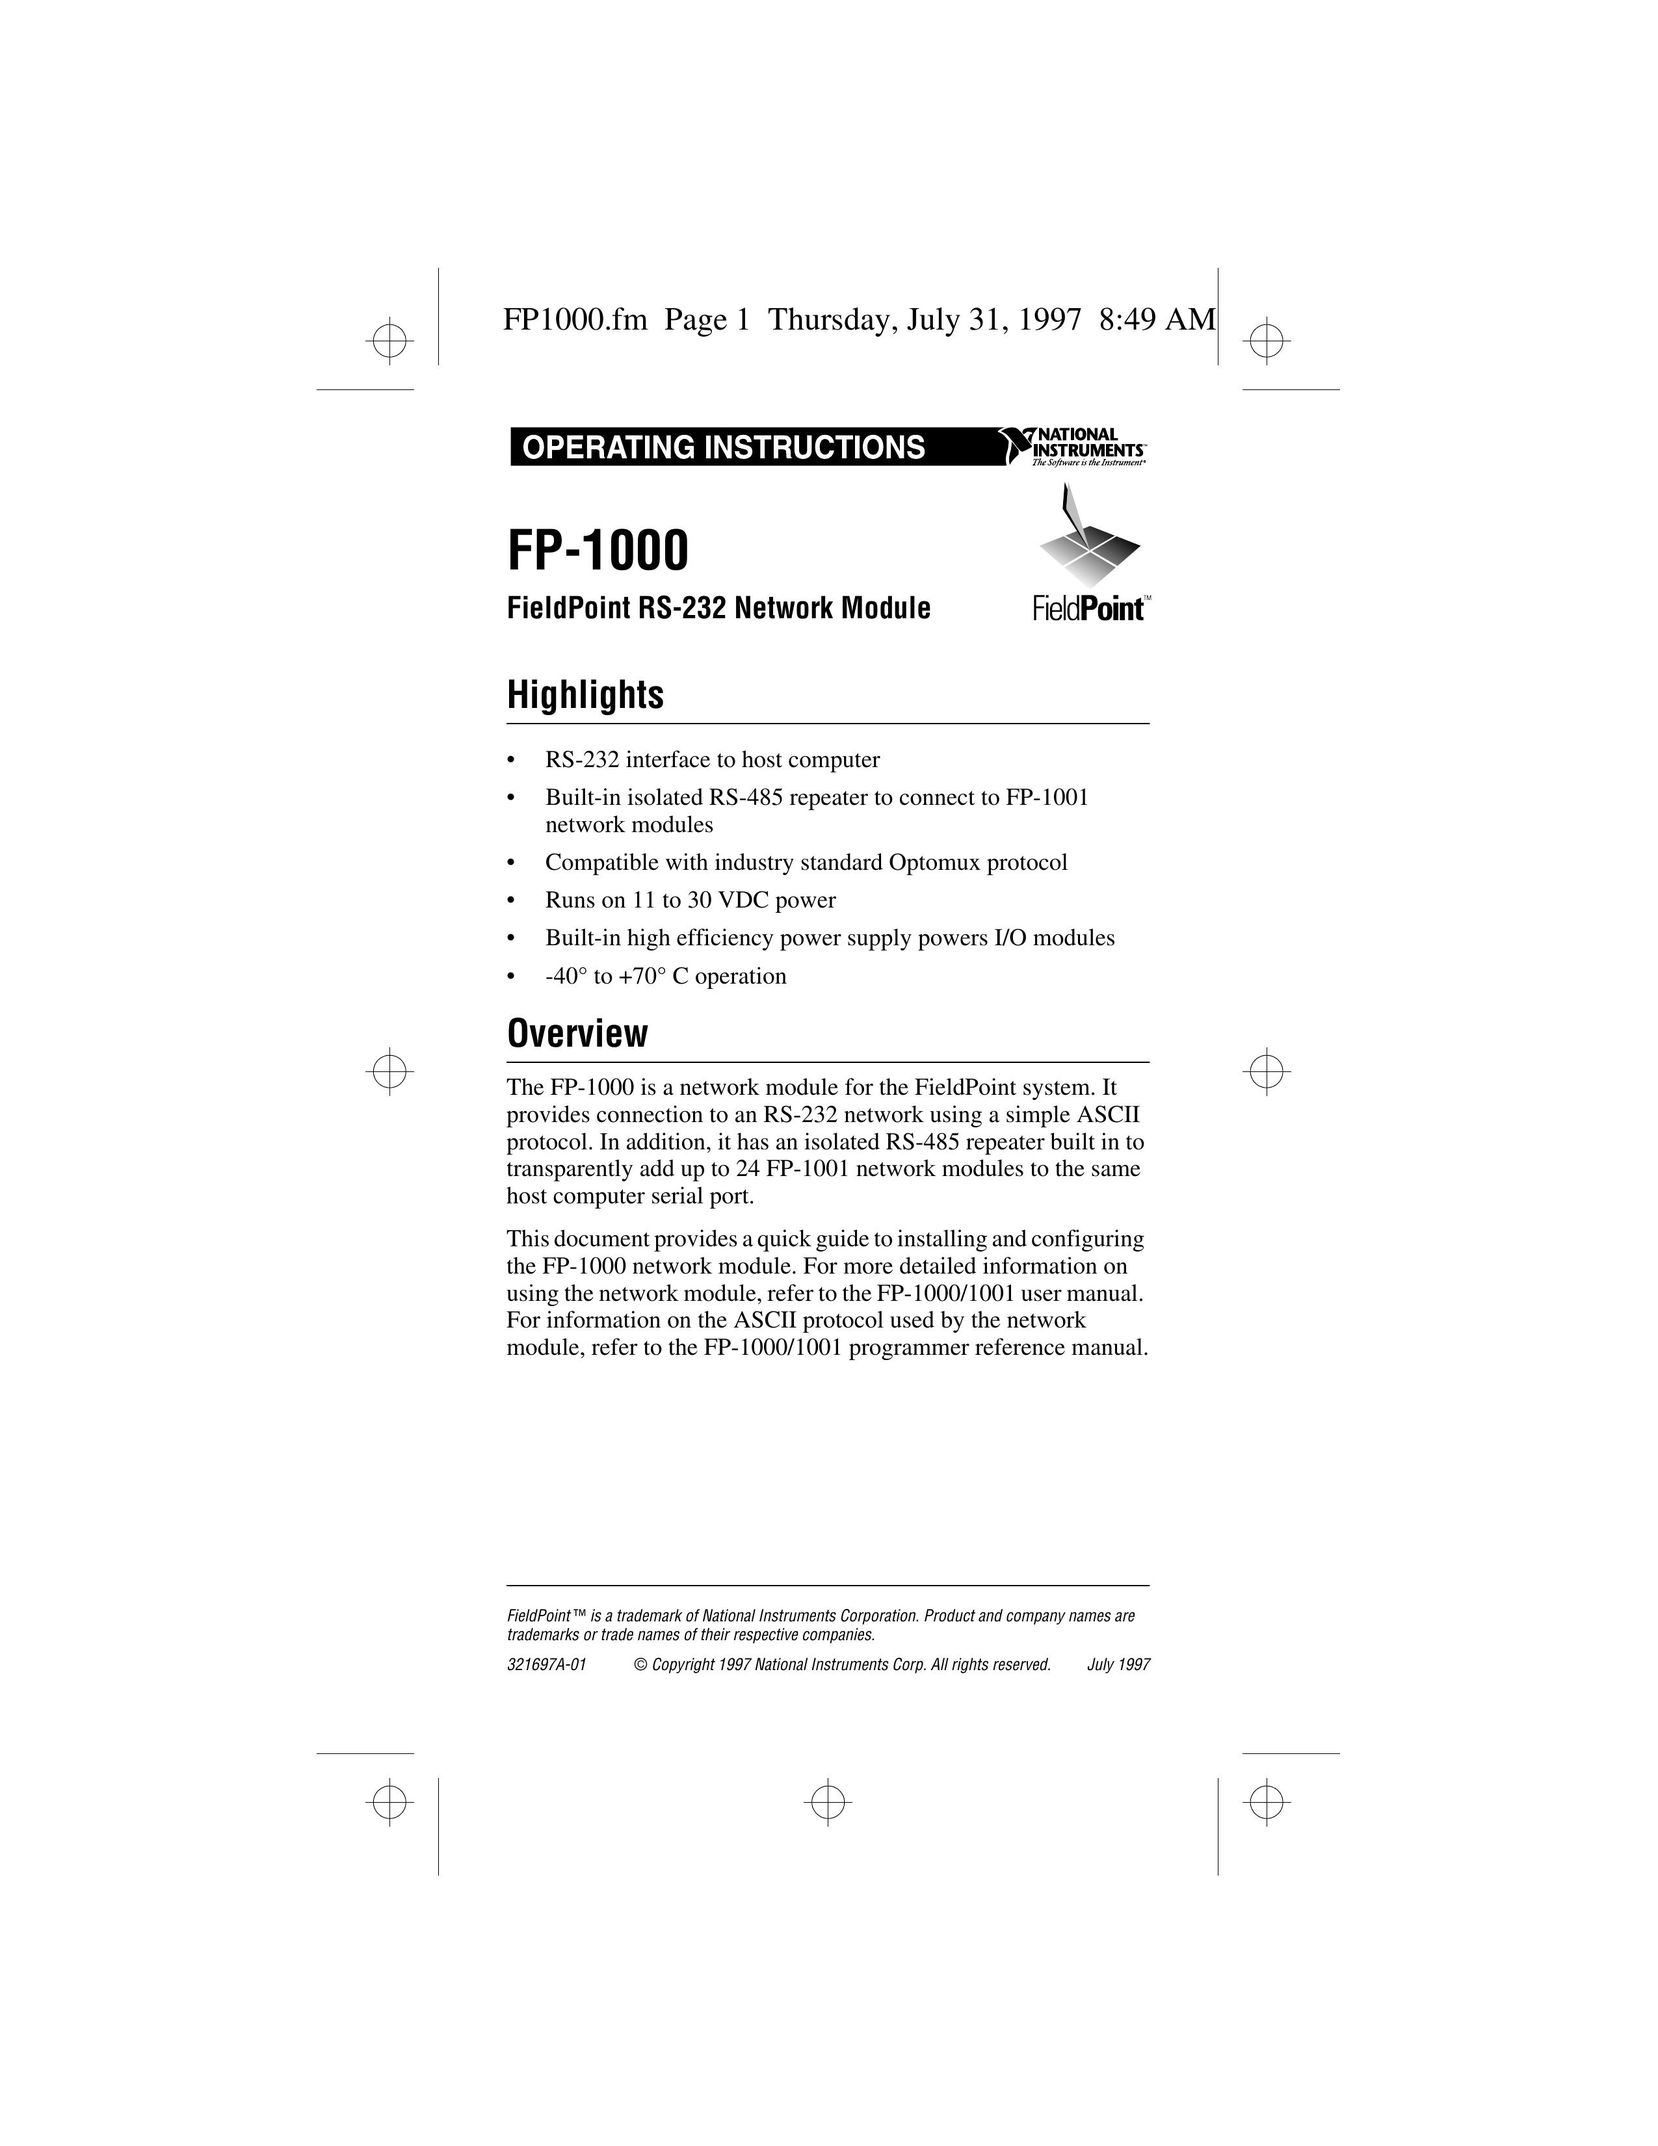 National Instruments FP-1000 Network Router User Manual